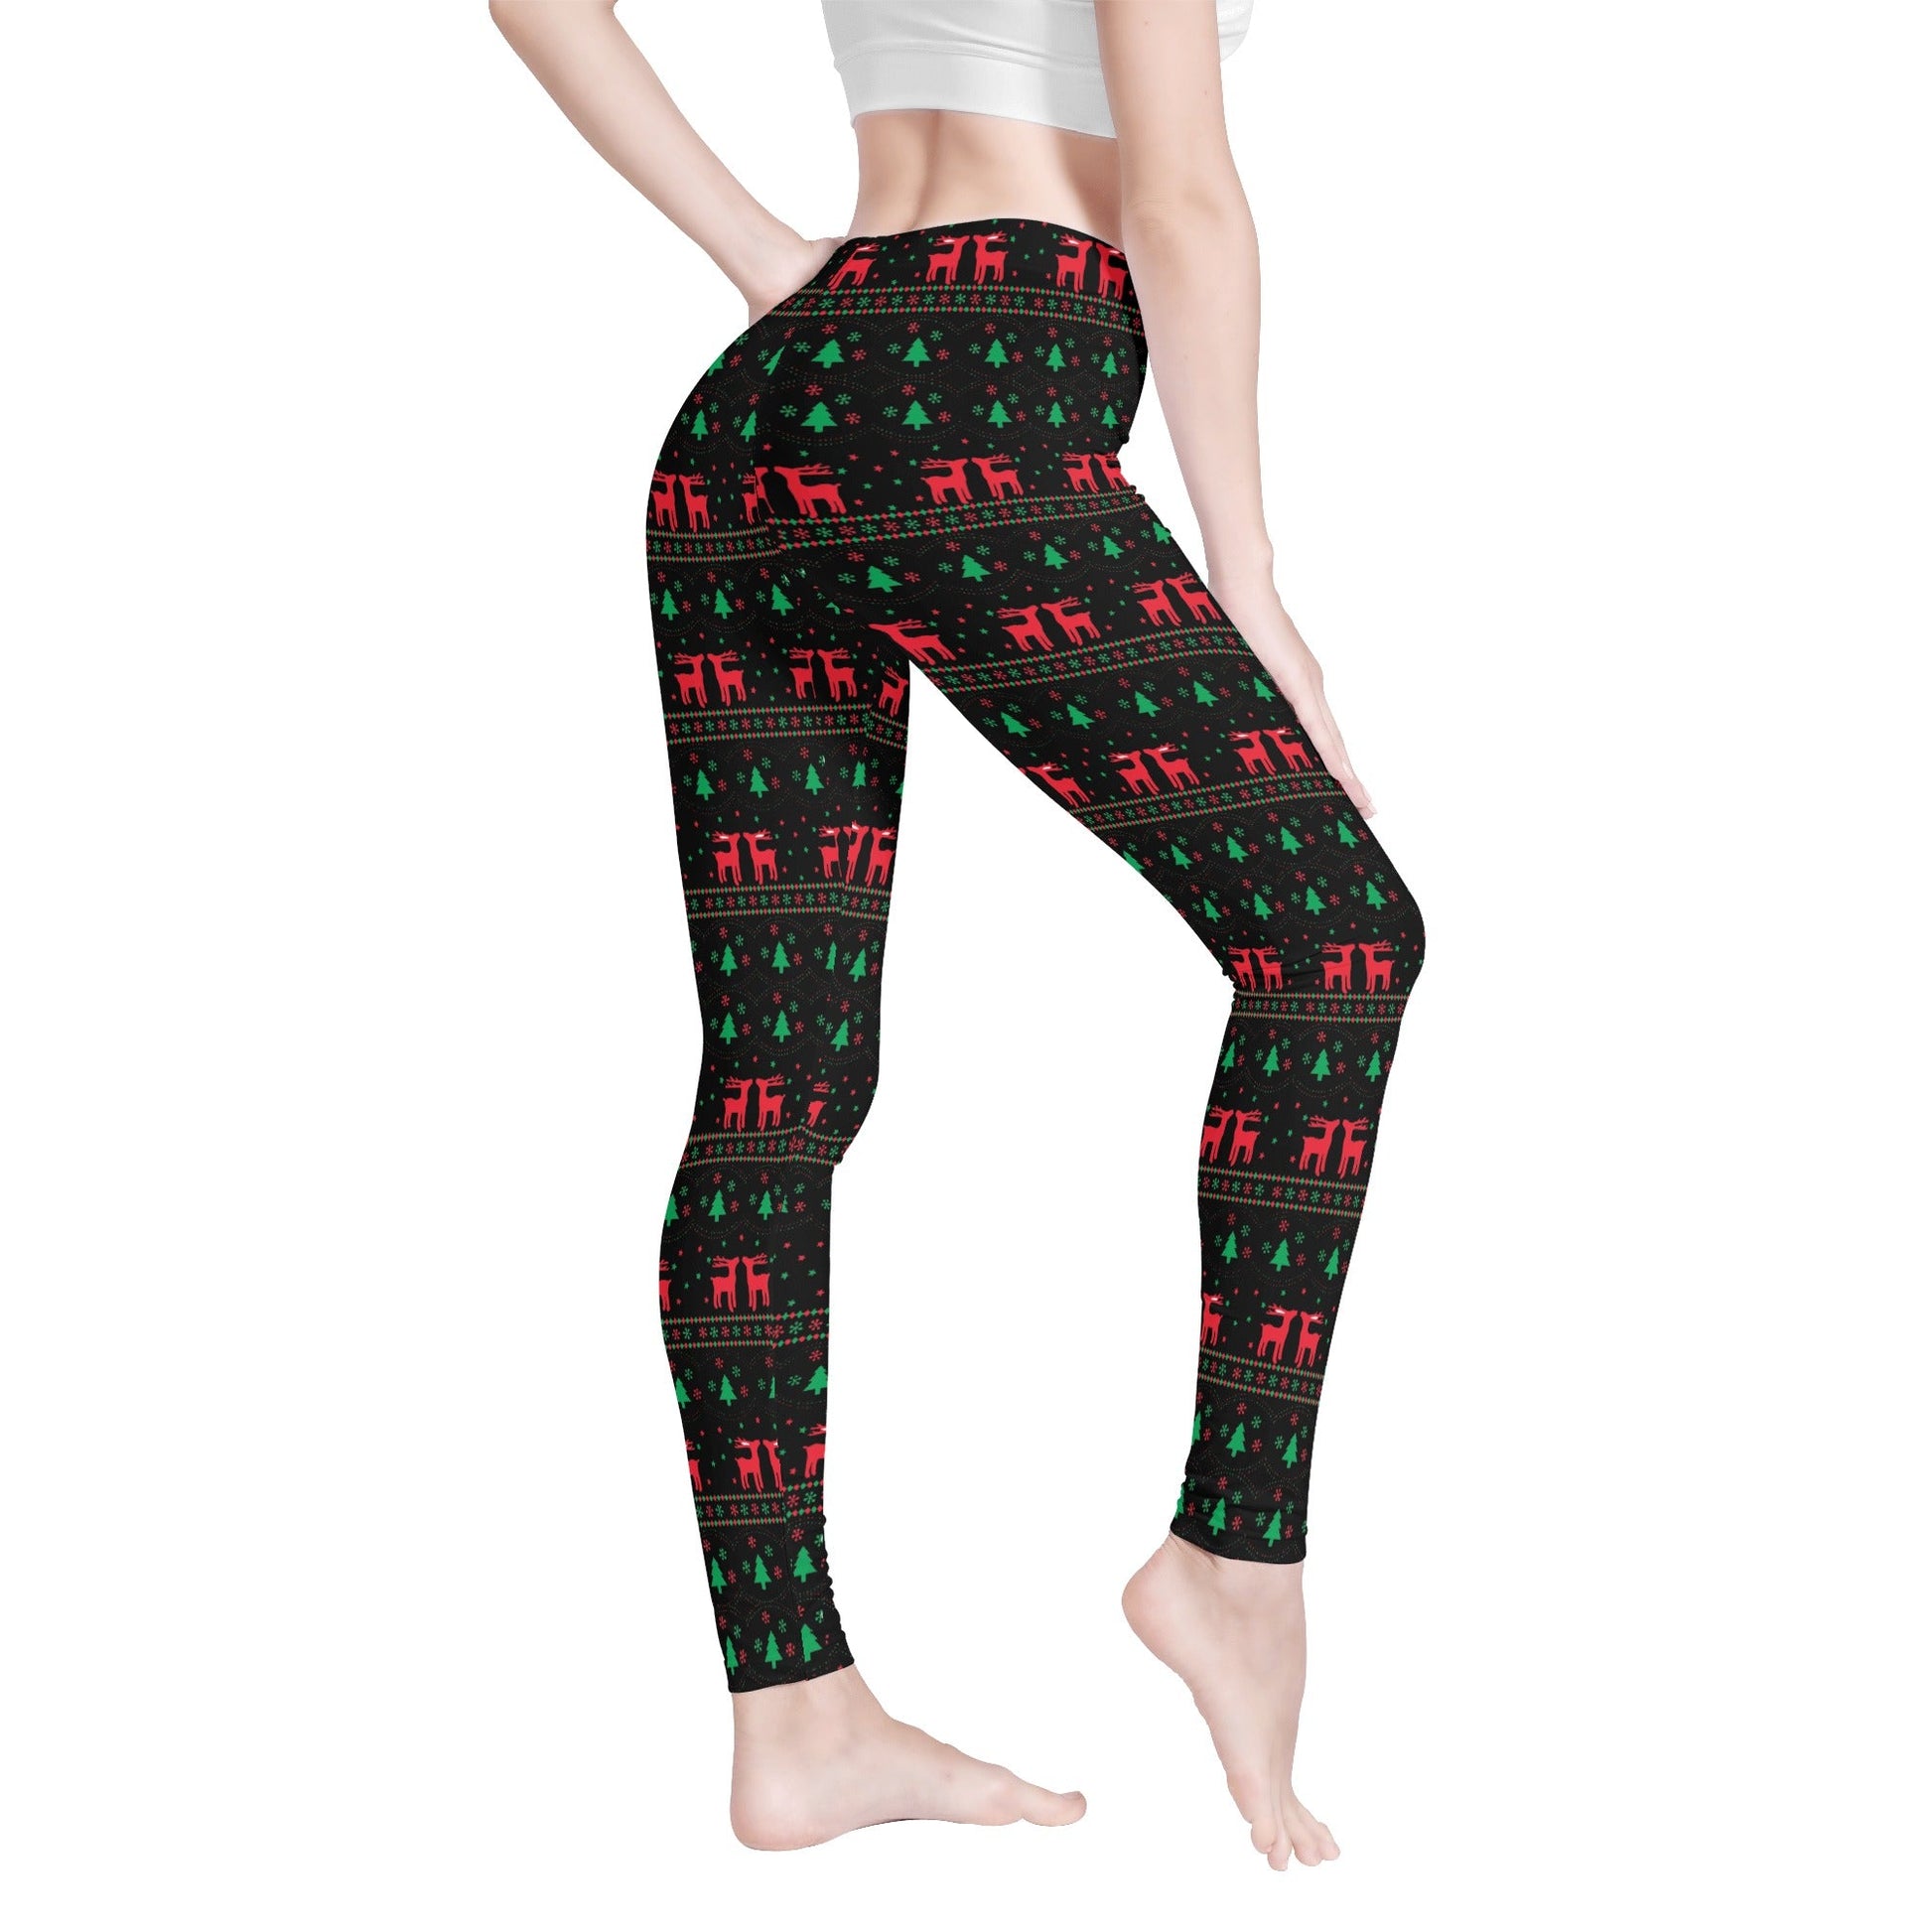 Stand out  with the  Nuggmas Womens Leggings  available at Hey Nugget. Grab yours today!